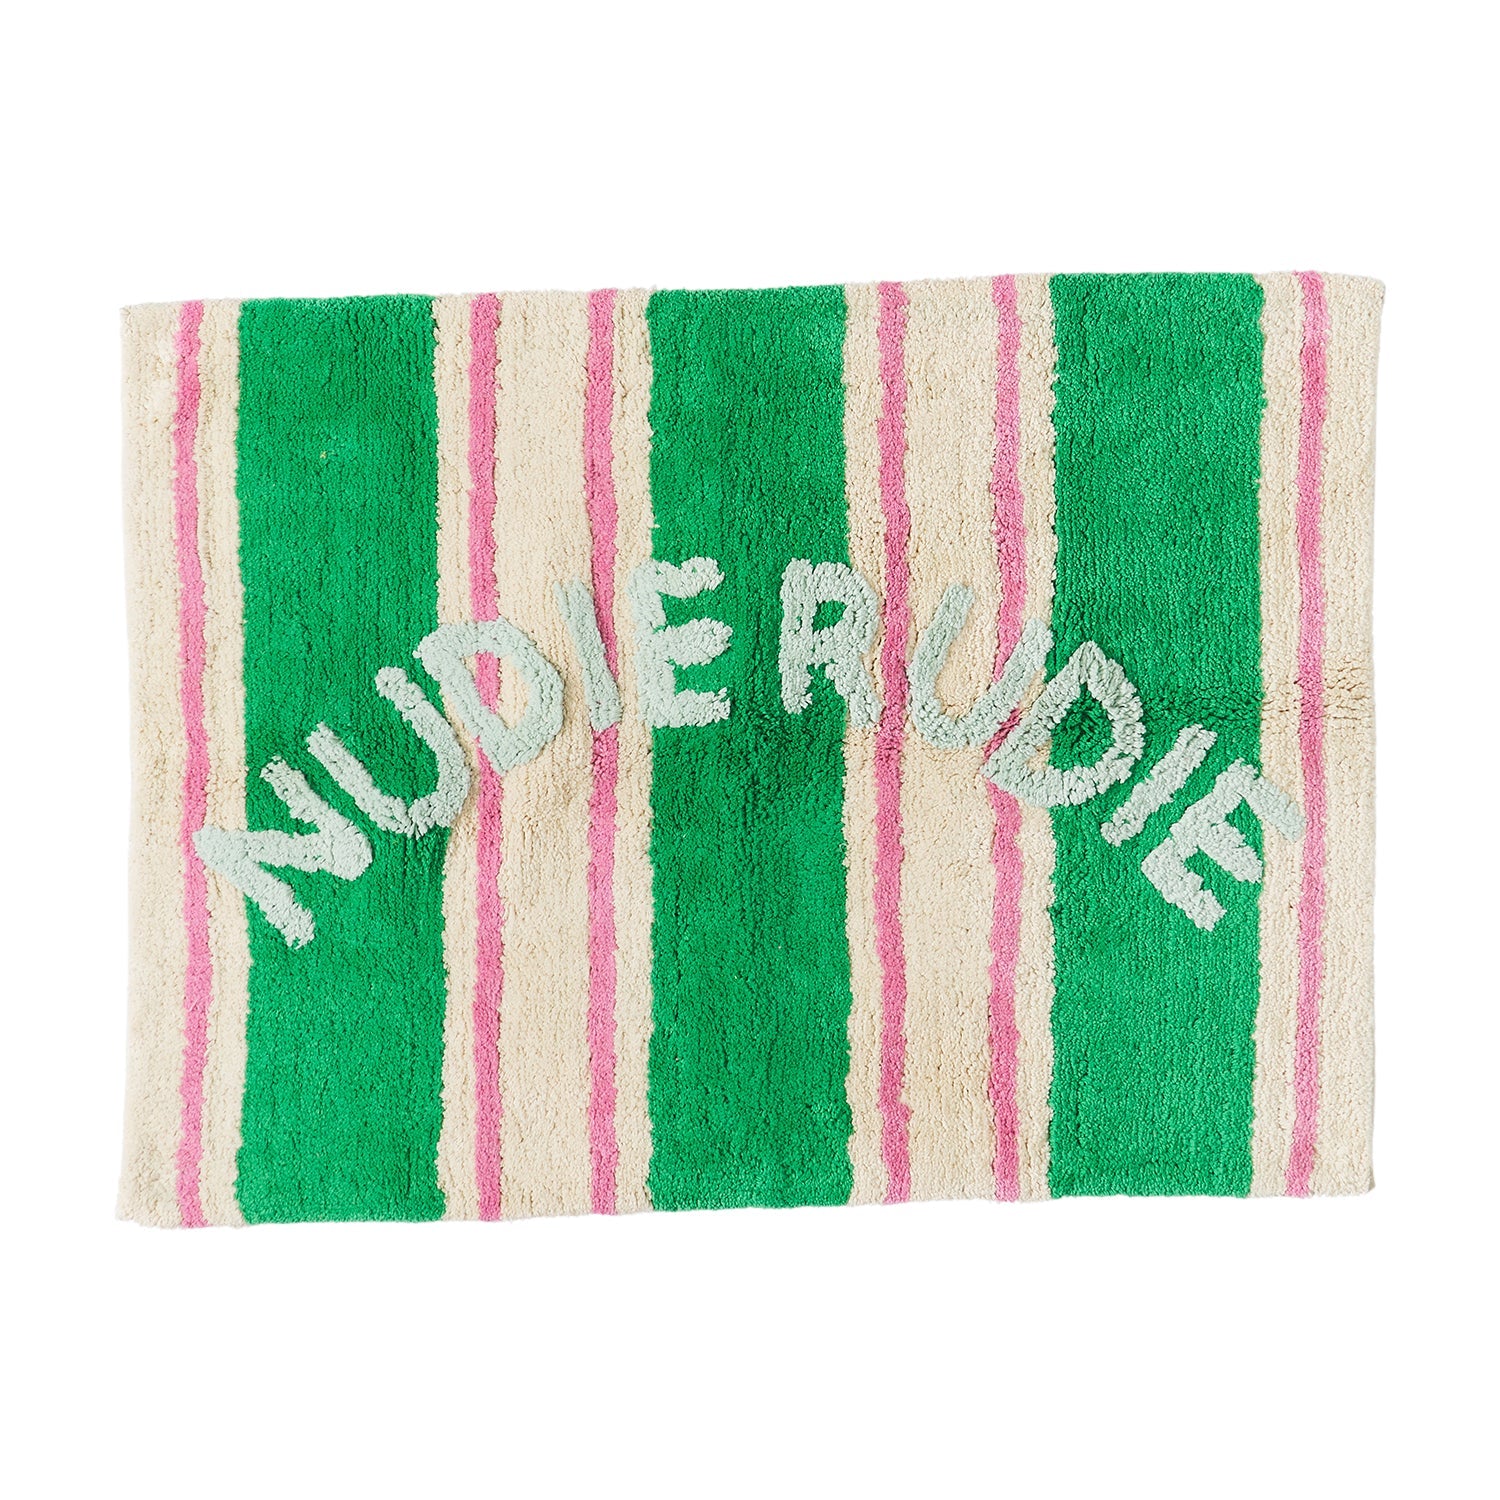 Ballico Nudie Rudie bath mat from Sage & Clare in pink and green